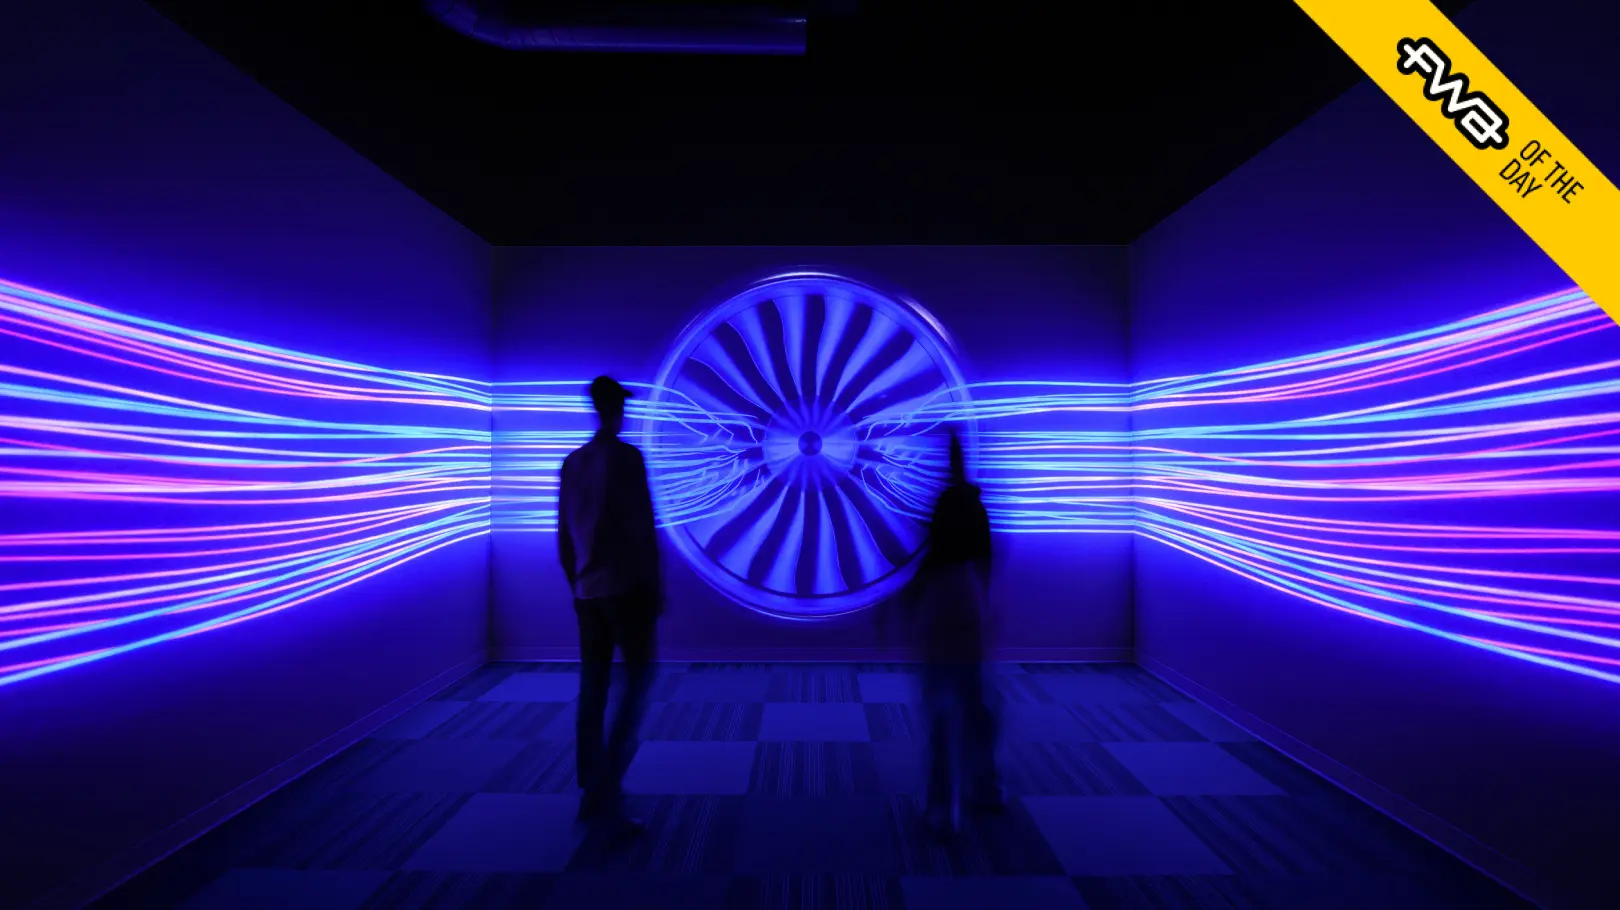 Two people standing in the center of a small room with a glowing blue image of an airplane engine covering all three walls, overlayed with "FWA of the Day" banner